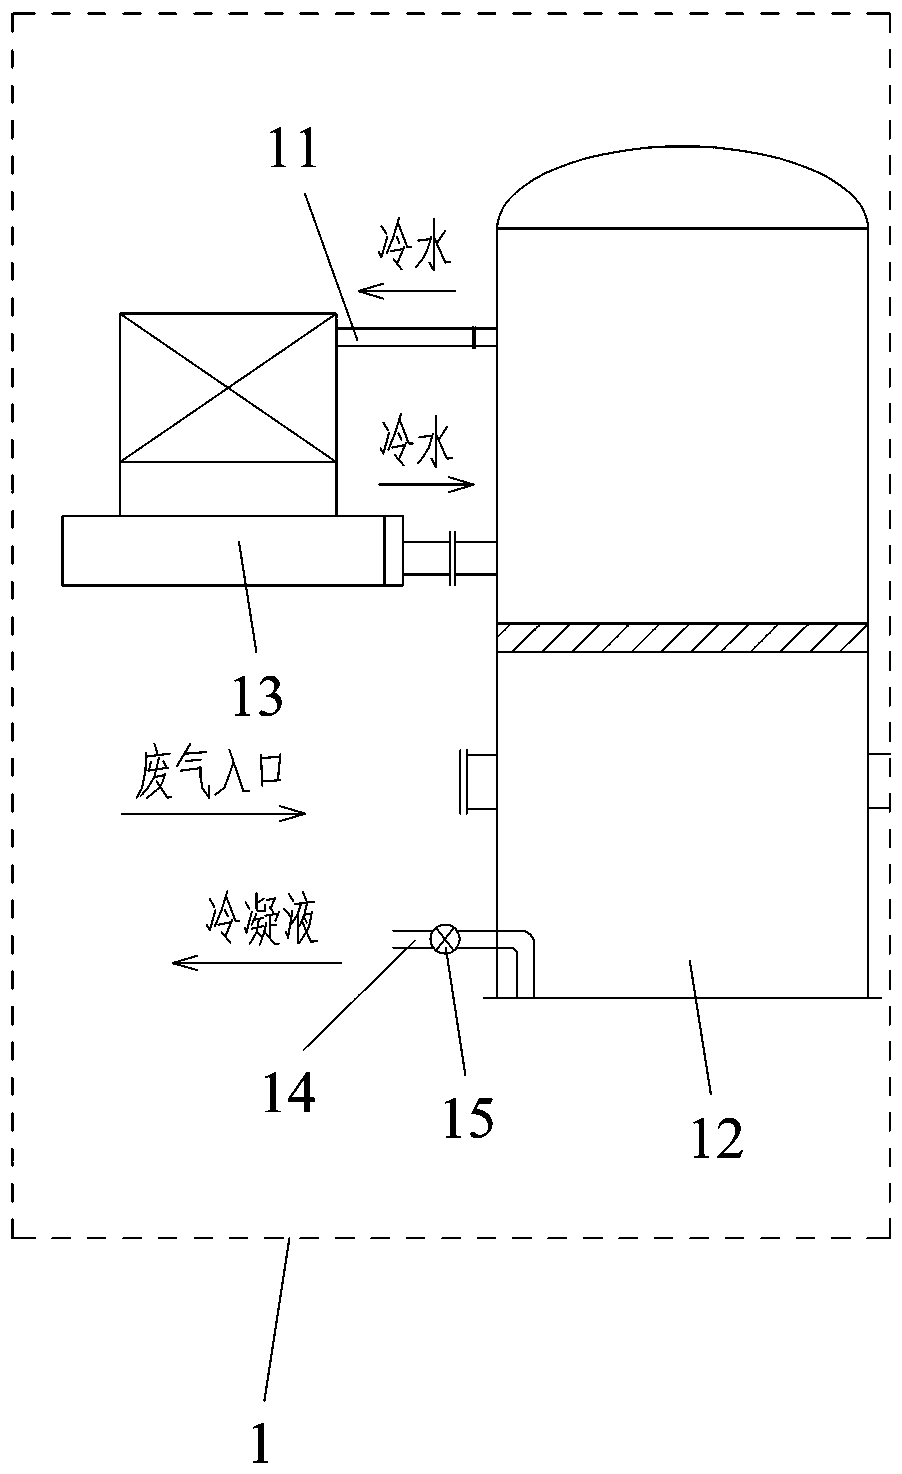 Iron oxide red pigment two-step oxidation process waste gas treatment method